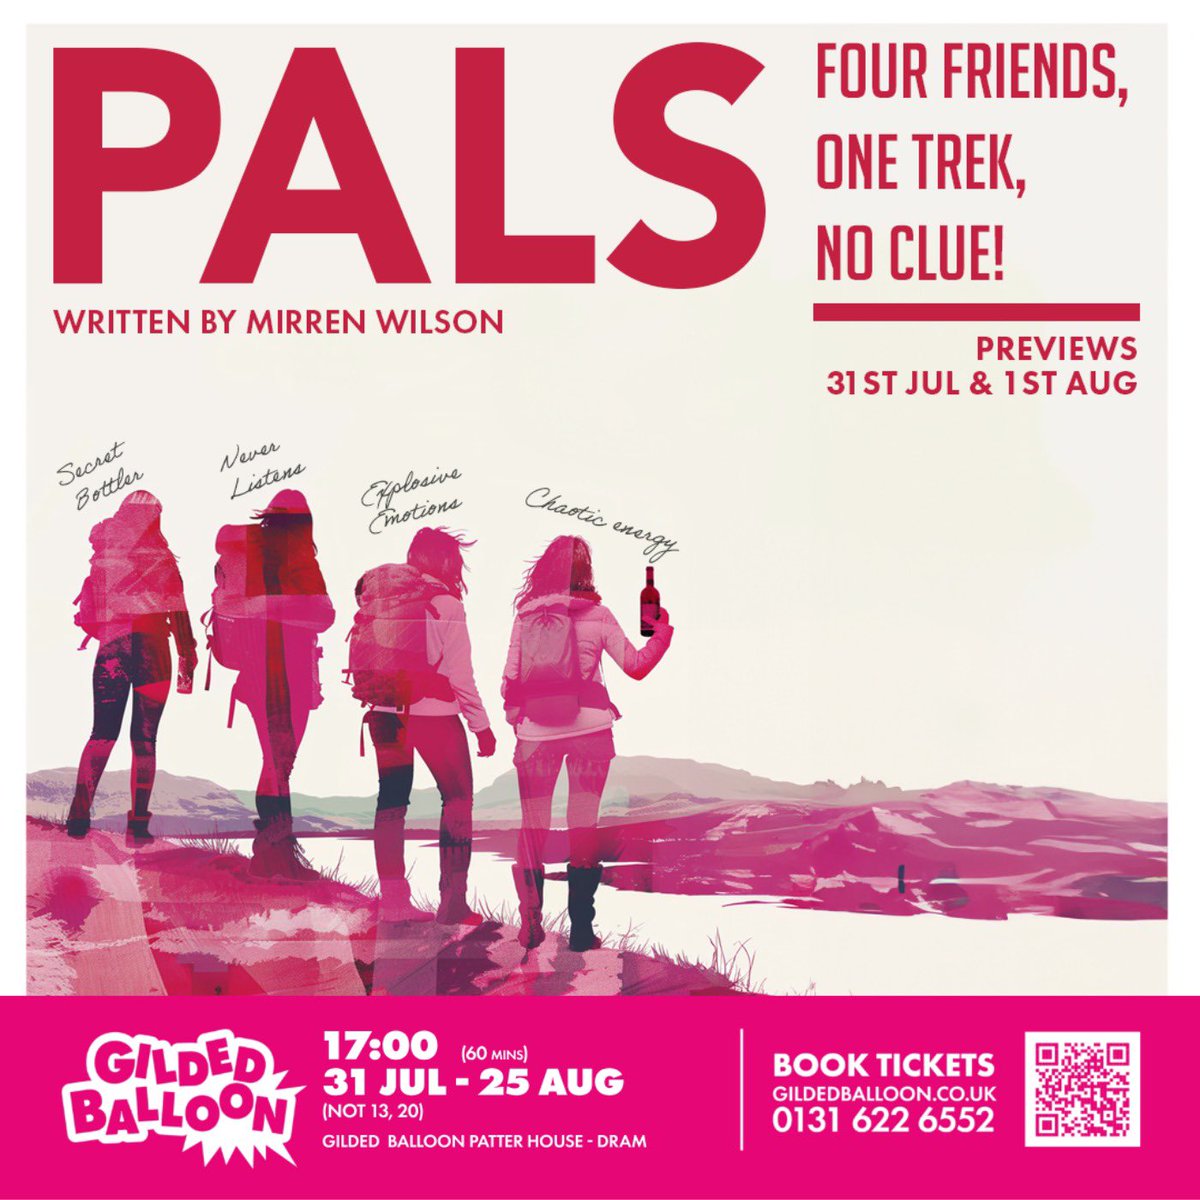 🎟️ TICKETS ON SALE NOW 🎟️

If you want to support new Scottish writing and female-led stories, then this one is for you. 🏴󠁧󠁢󠁳󠁣󠁴󠁿💪

📆 31st July - 26th August
⏰ 17.00
📍 @Gildedballoon - Patter Hoose
🎟️ tickets.edfringe.com/whats-on/pals

#UnleashYourFringe